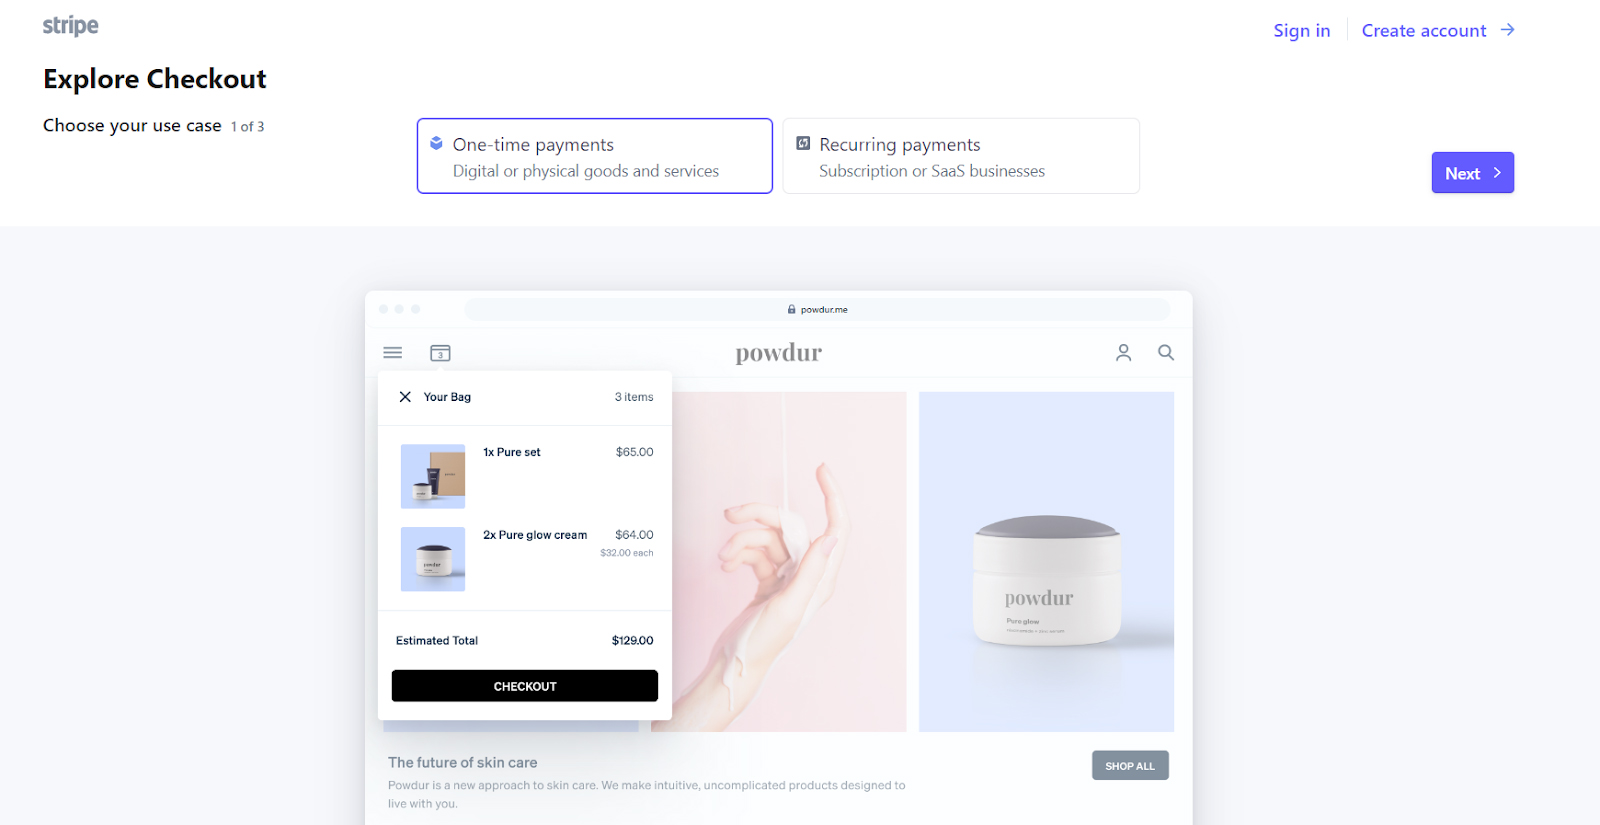 Stripe's Checkout page for one-time payments or recurring payments.